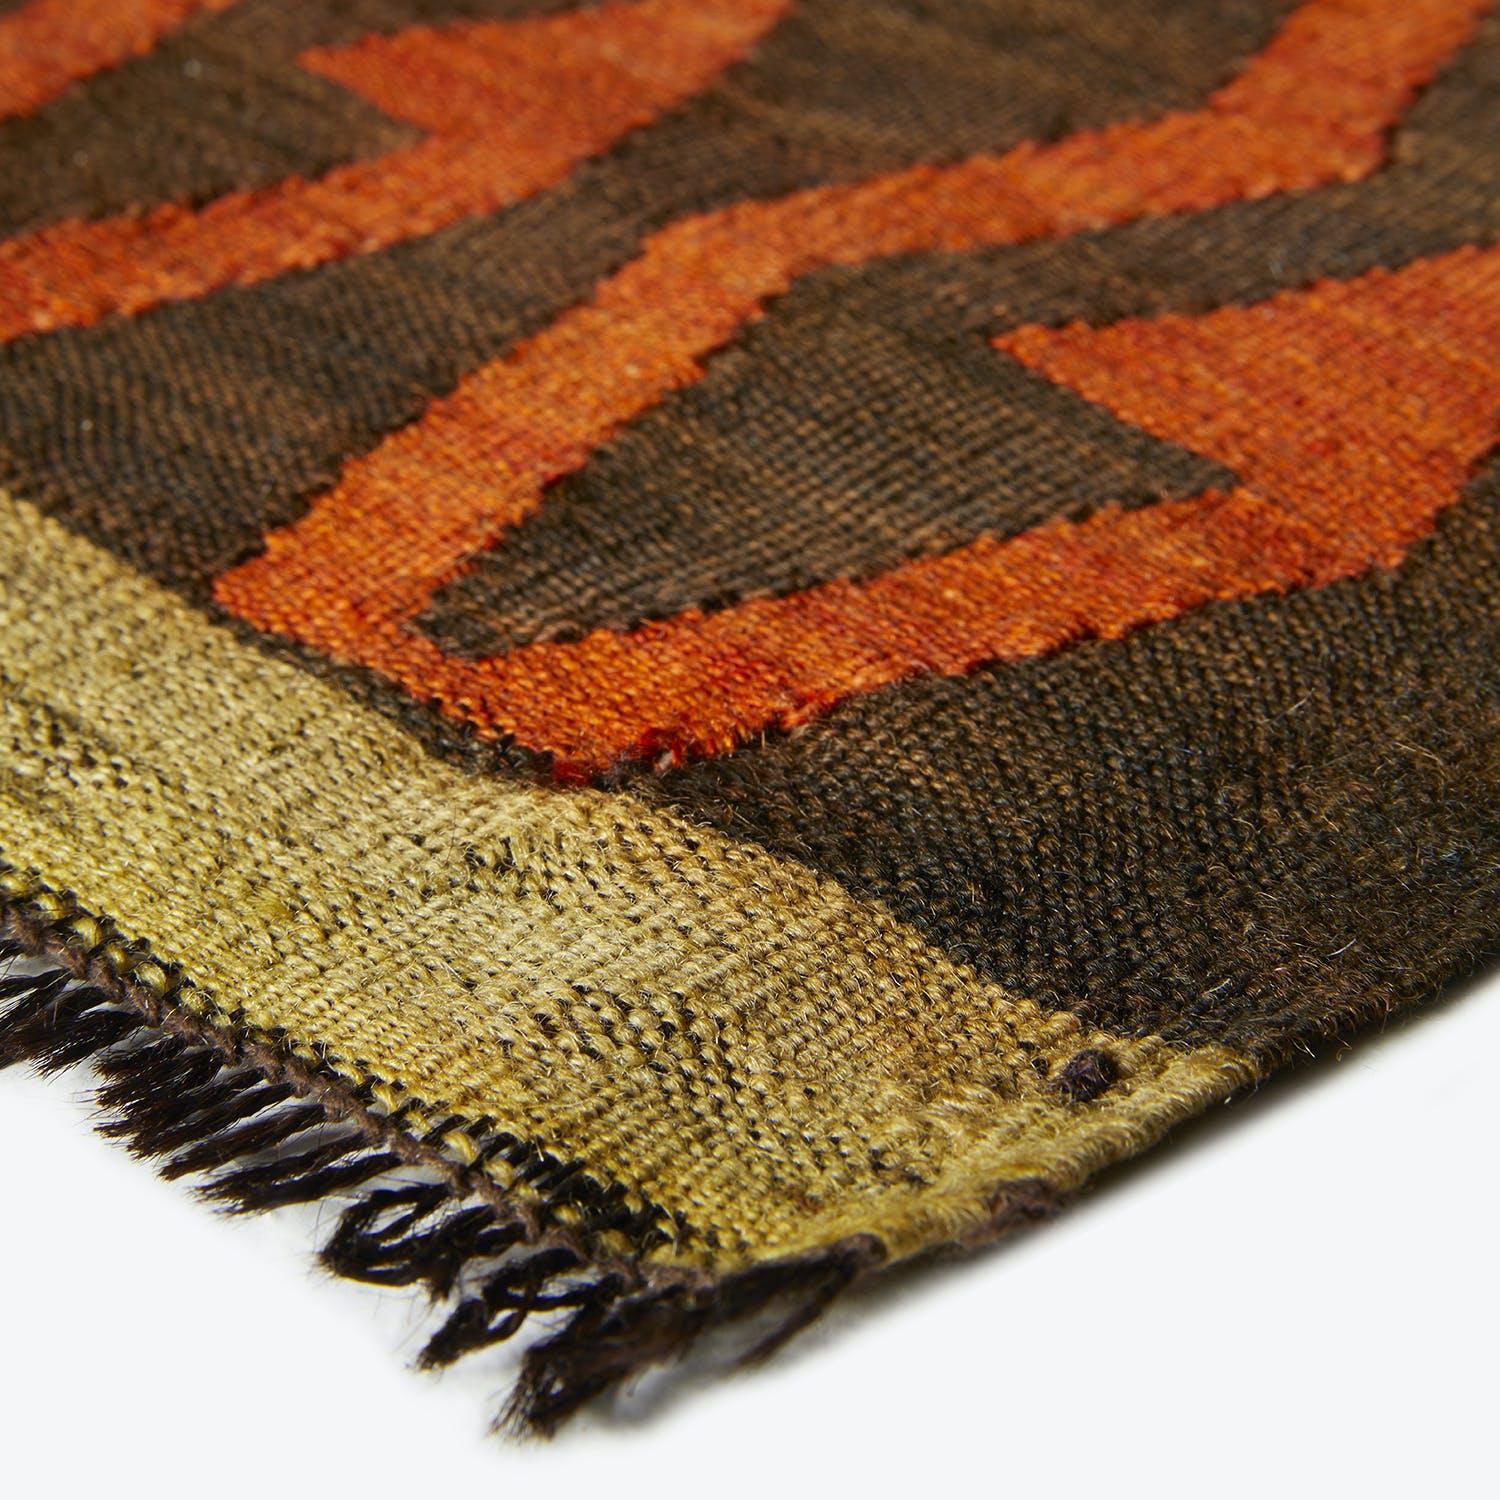 CLOSE-UP: Vibrant, zigzag striped textile with fringed edge and coarse fibers.